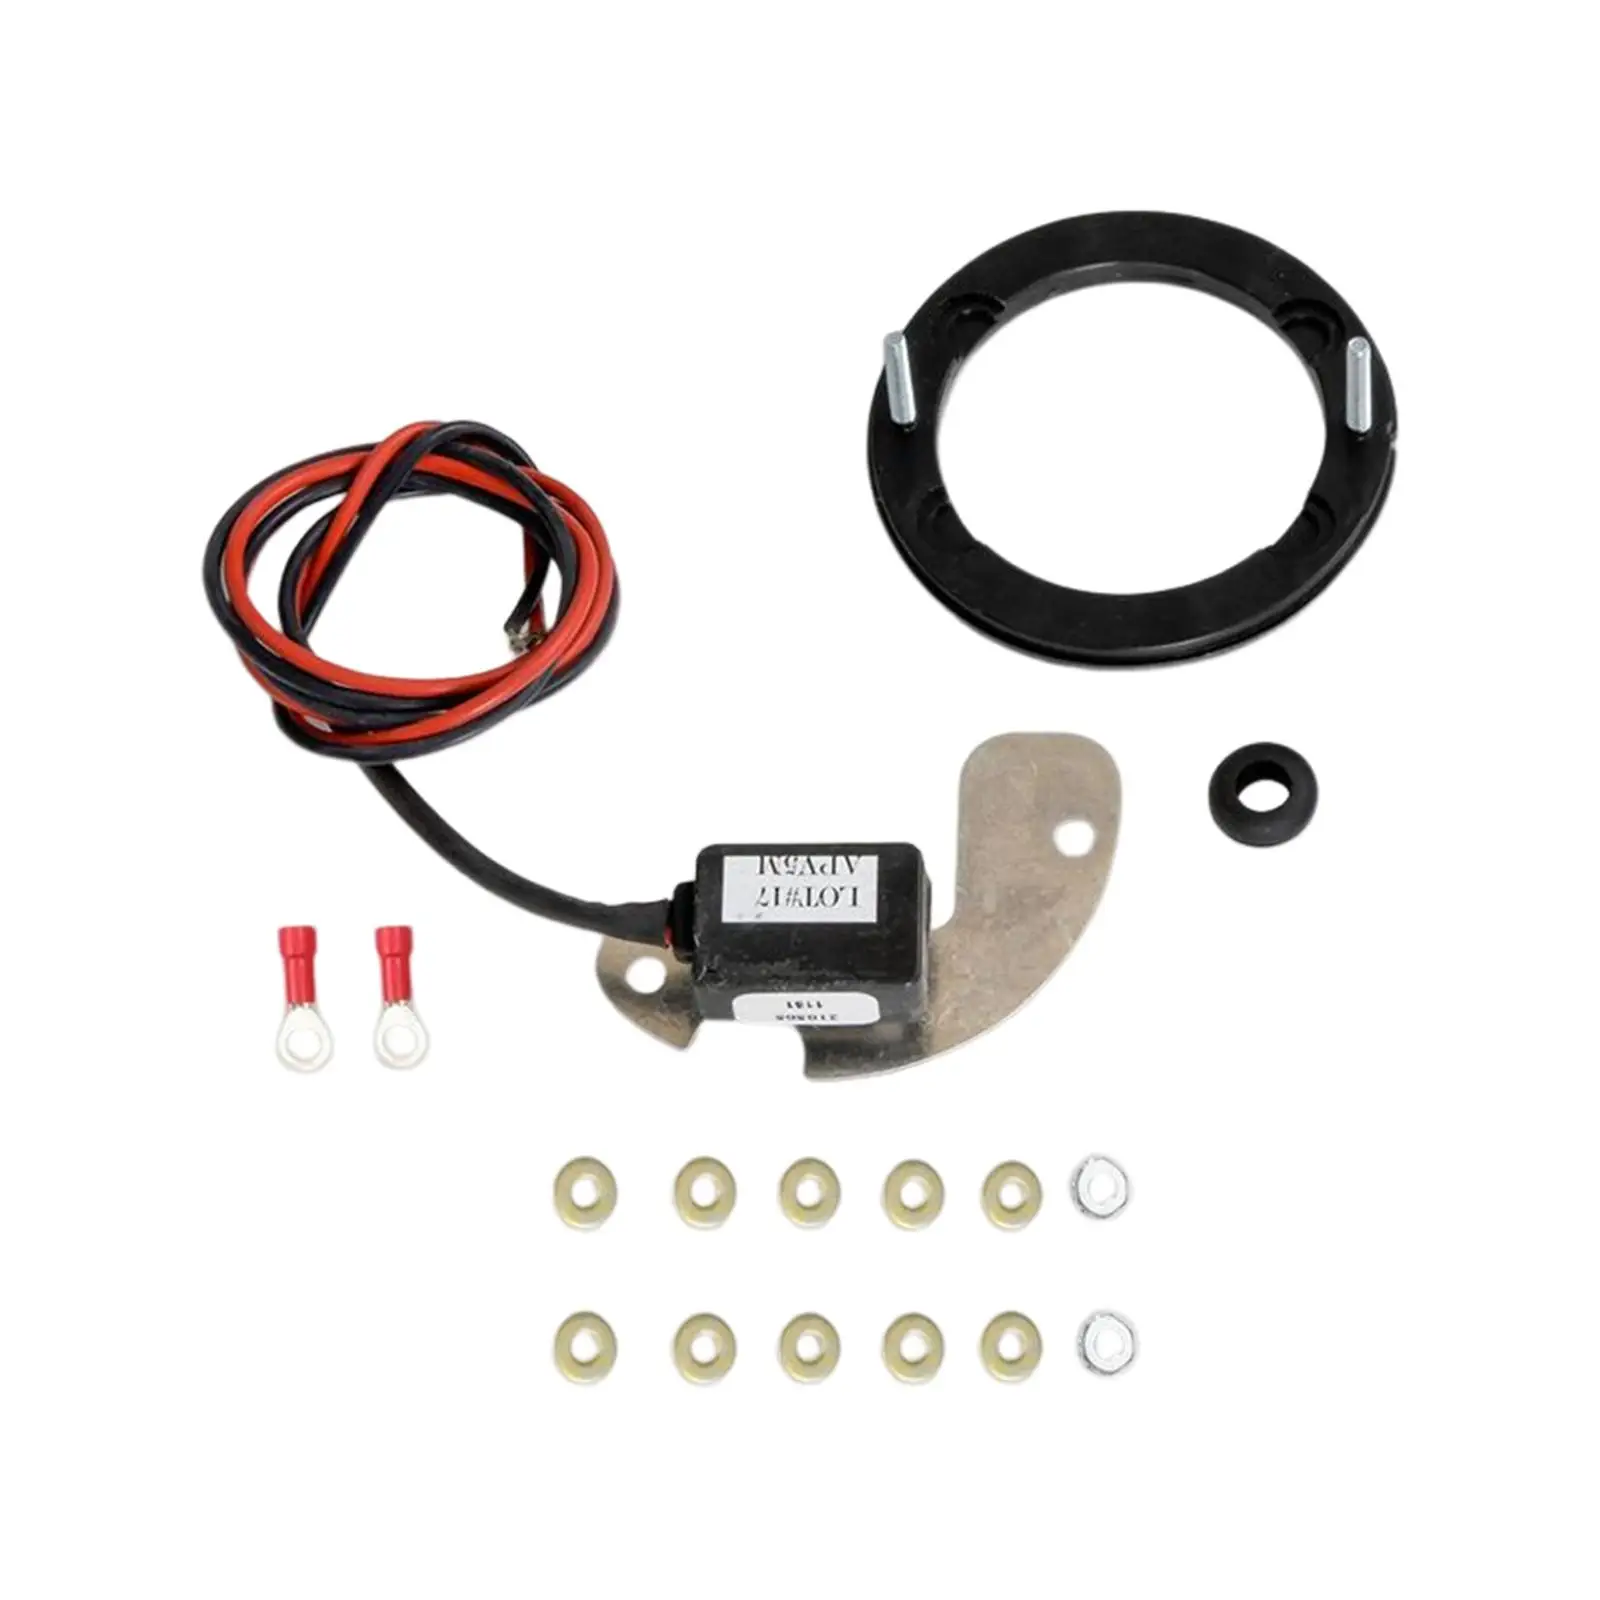 1181 Ignitor Parts Replaces High Performance Electronic Igniters Conversion Set for Delco 8 Cylinder 1956-1974 Accessory